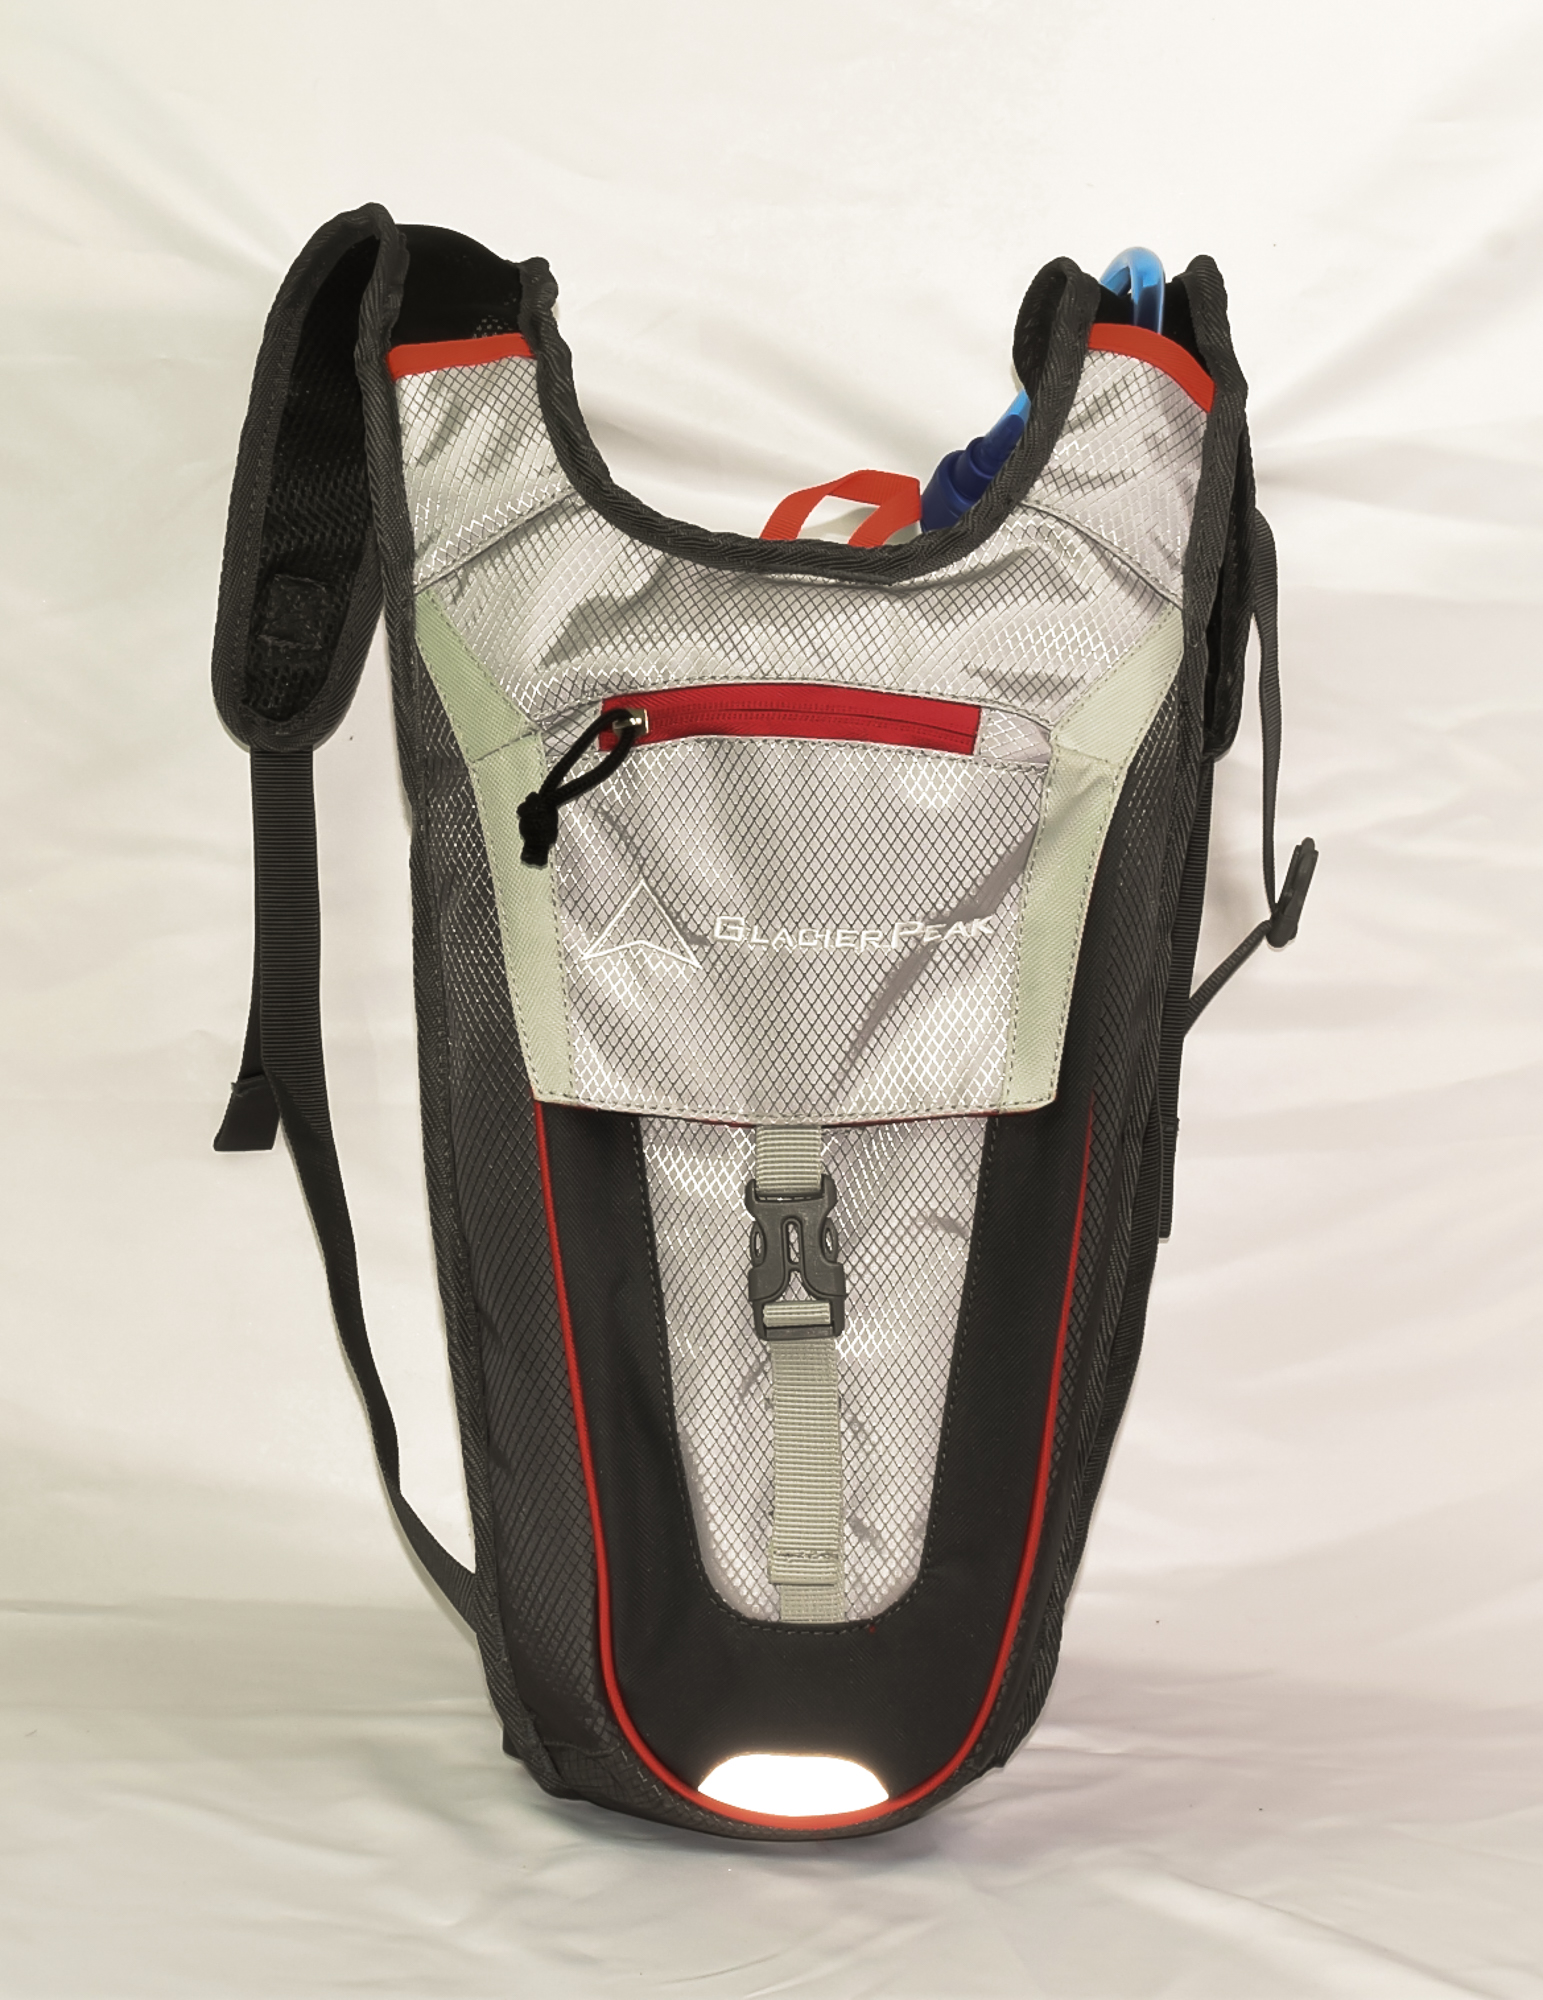 Blue Nile Hydration Pack